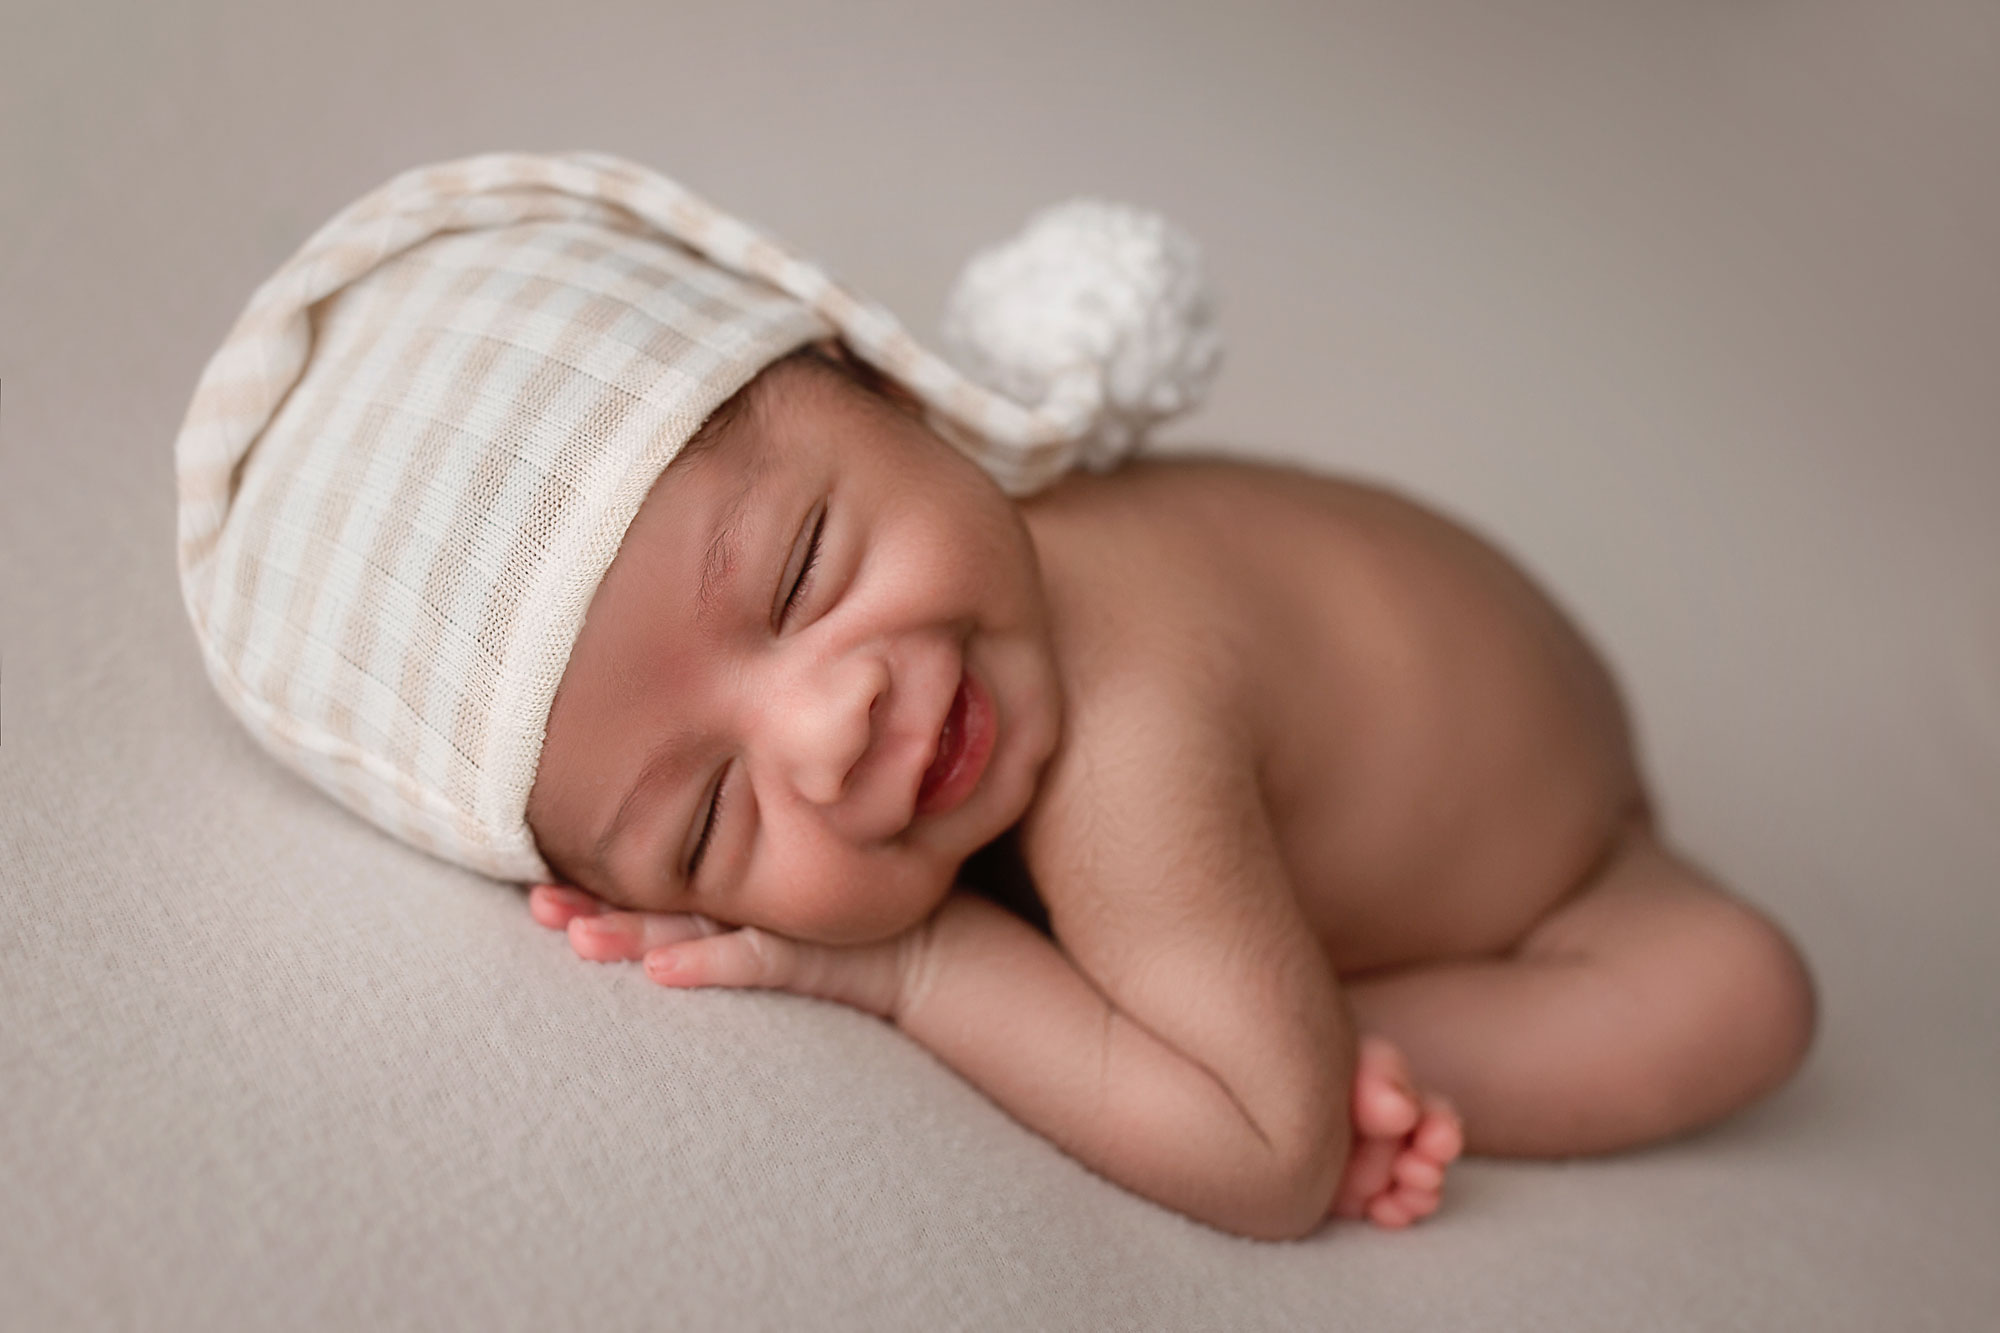 newborn photo ideas for photography session